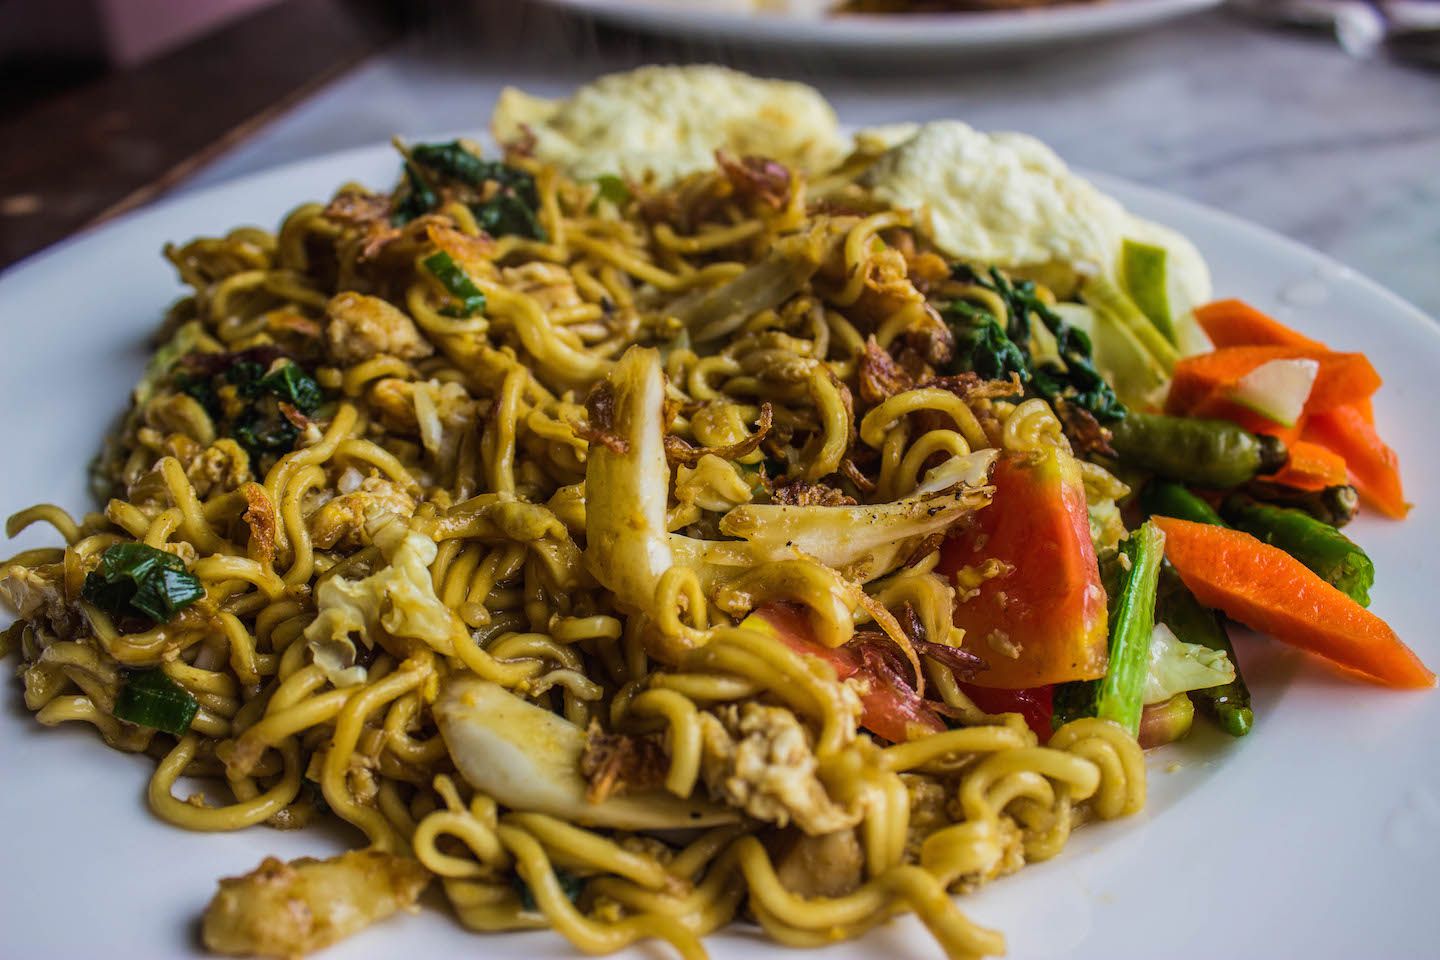 Mie Goreng in Indonesia